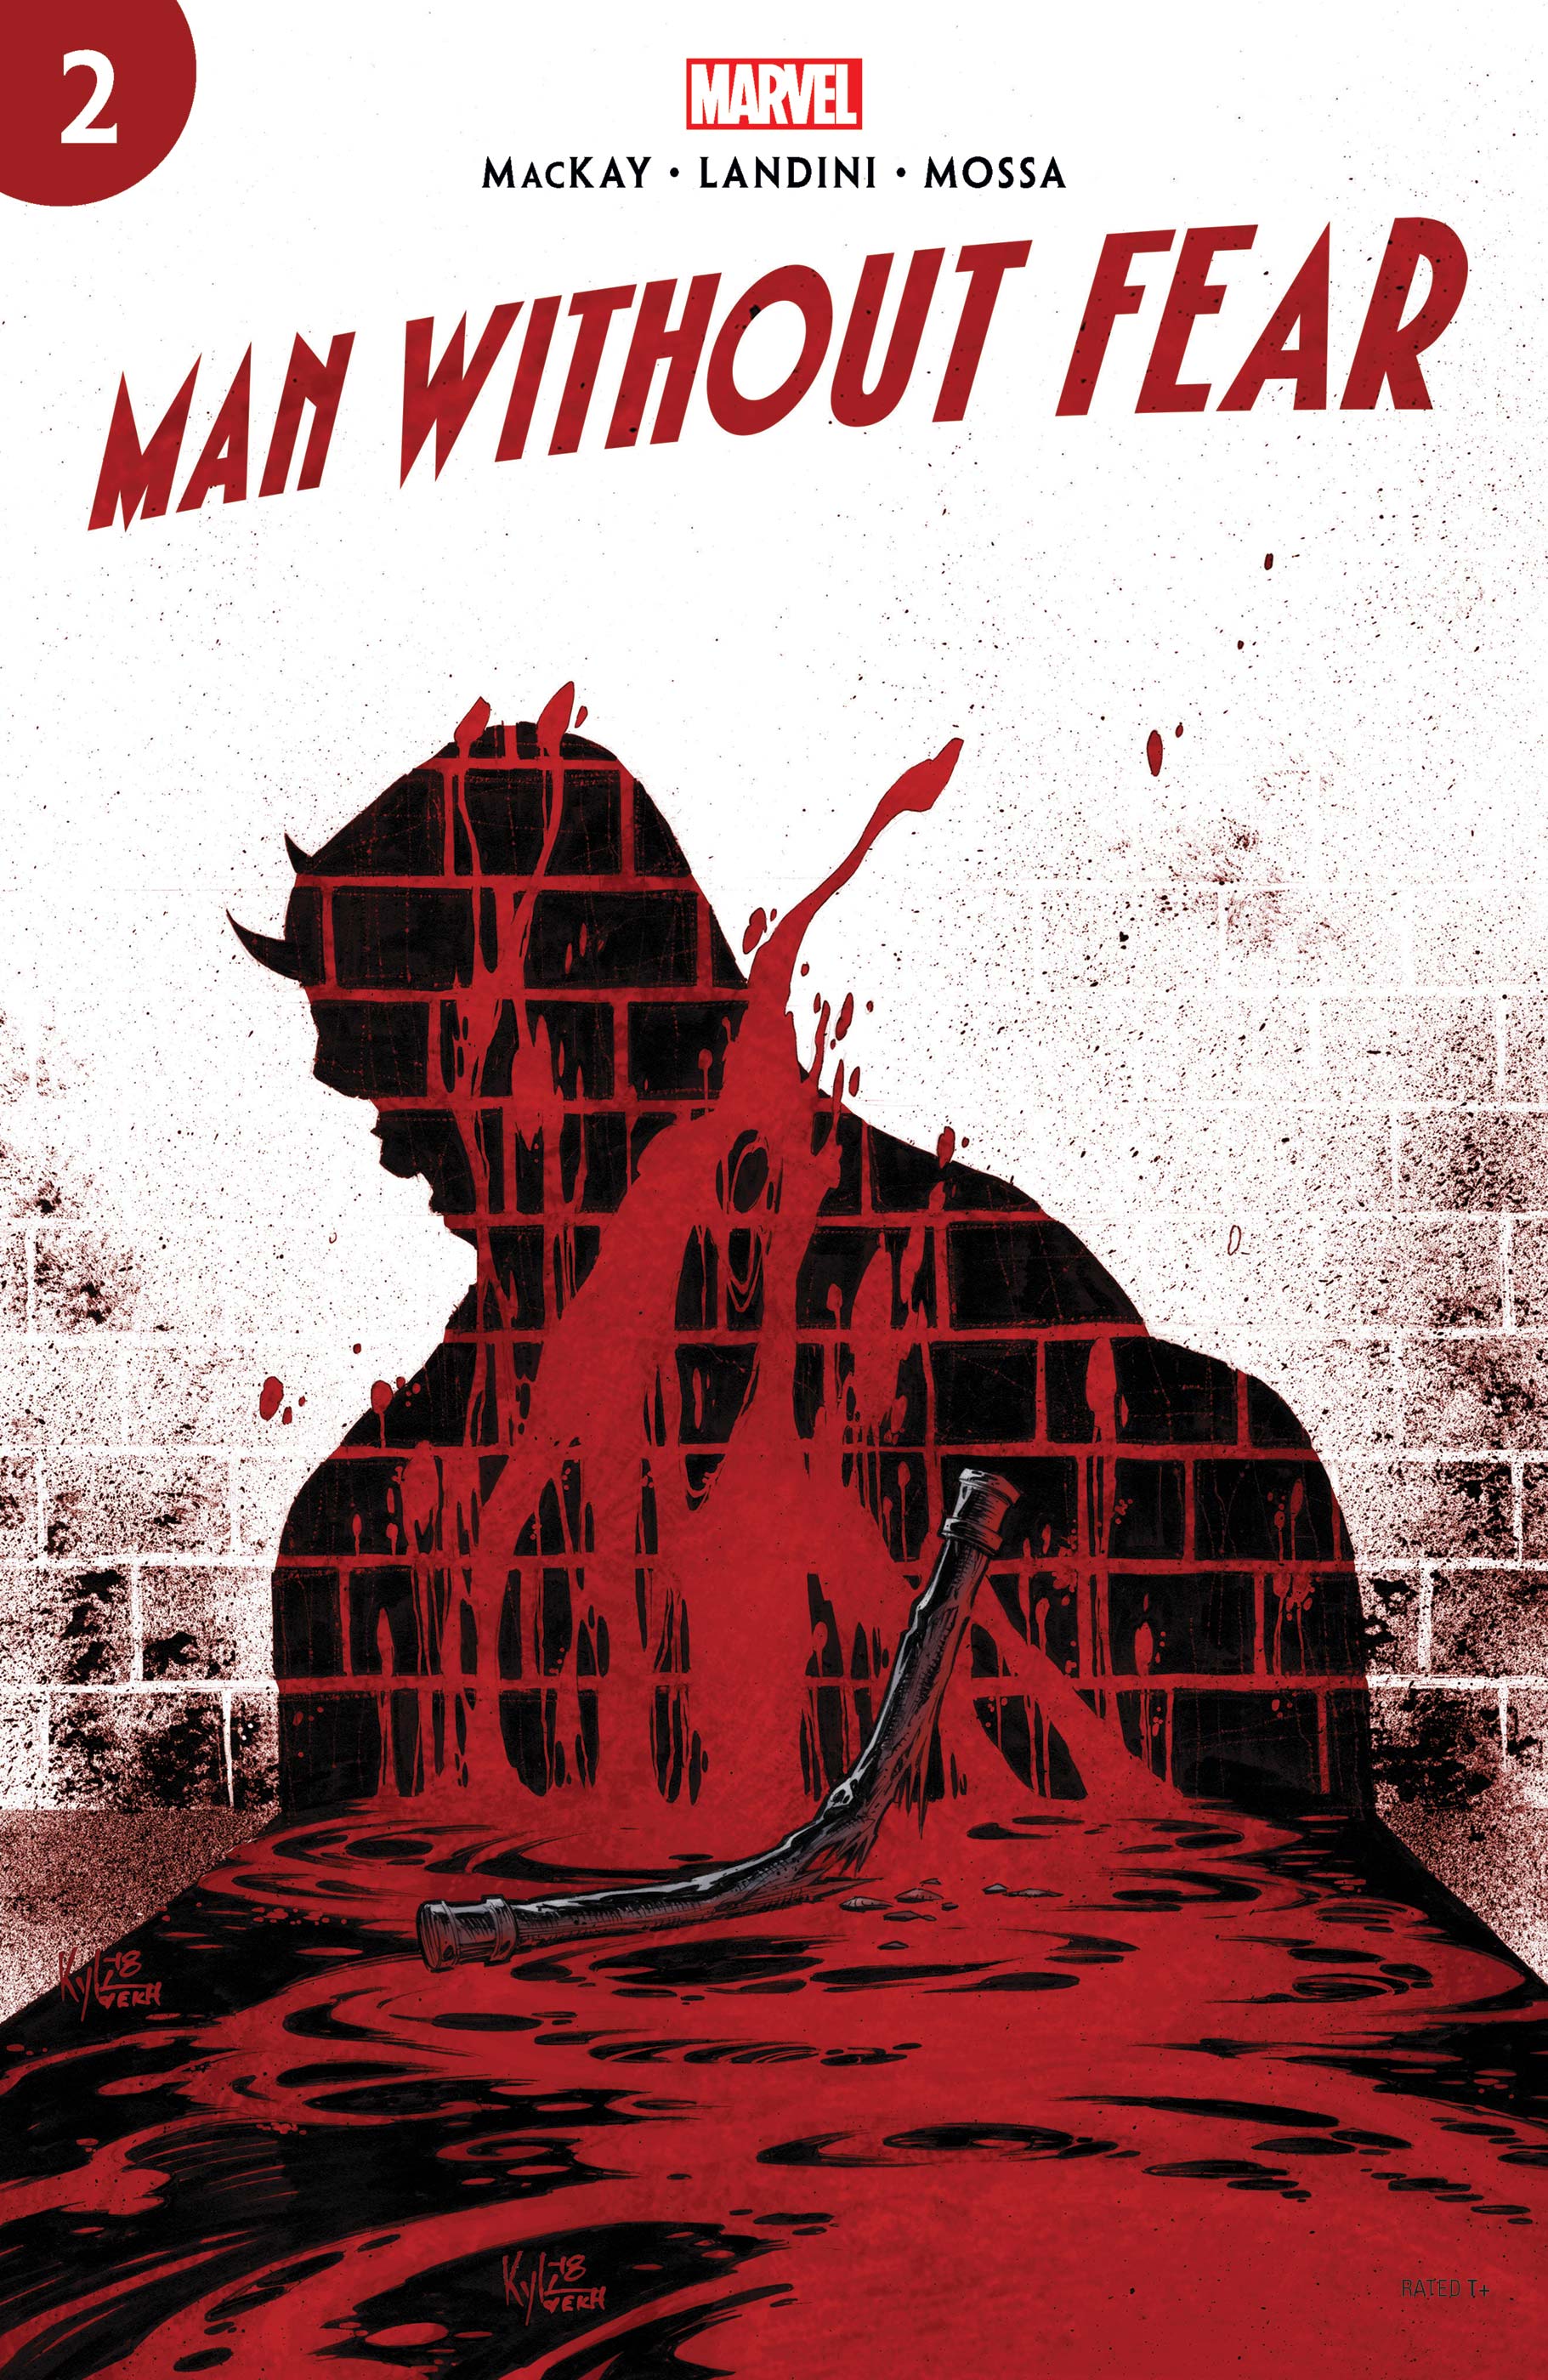 Man Without Fear (2019) #2